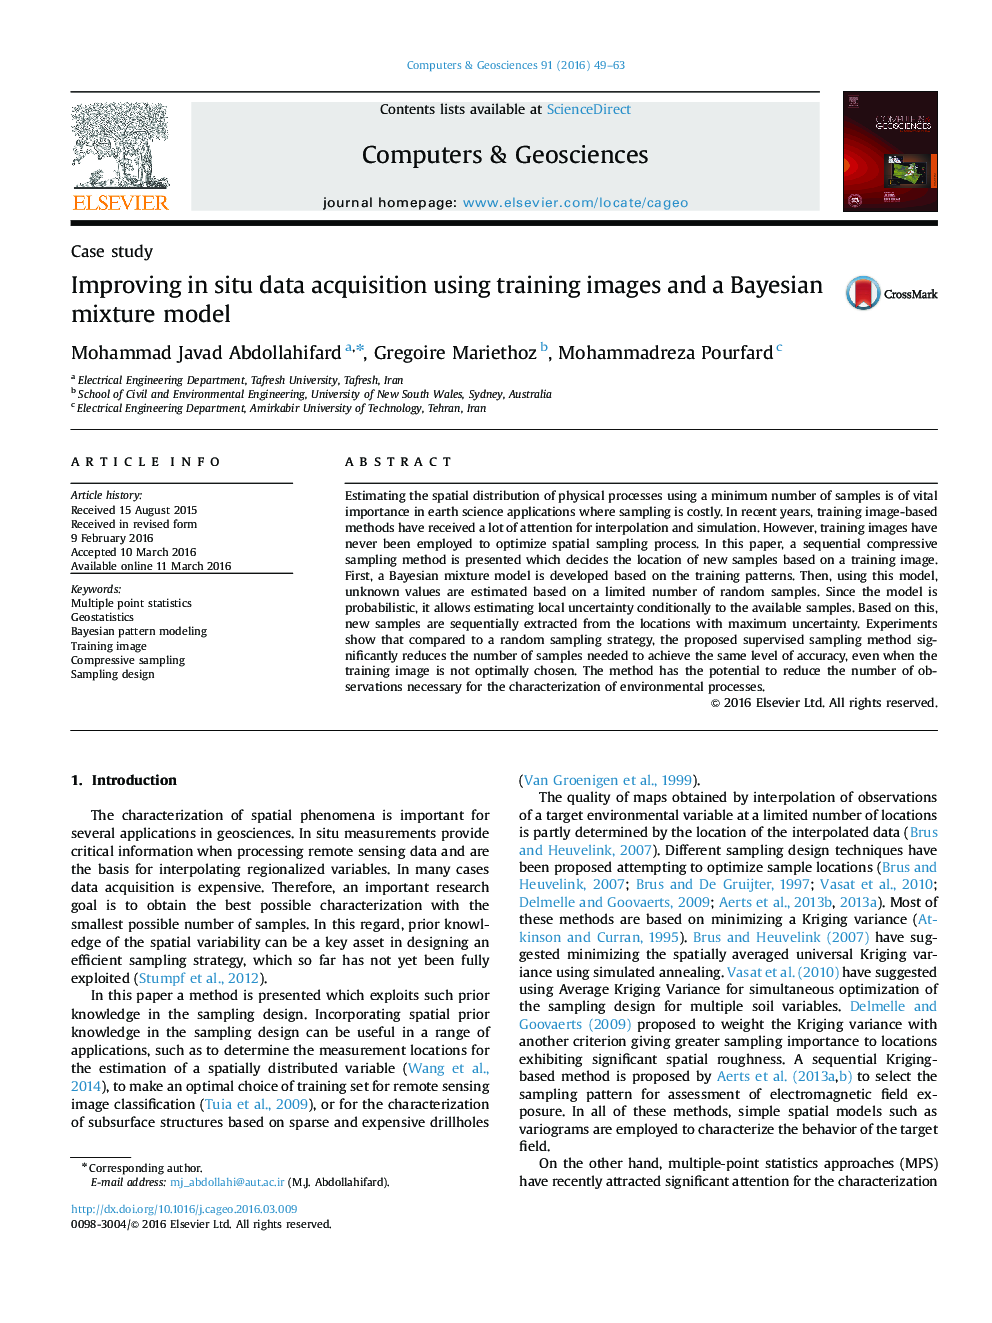 Improving in situ data acquisition using training images and a Bayesian mixture model